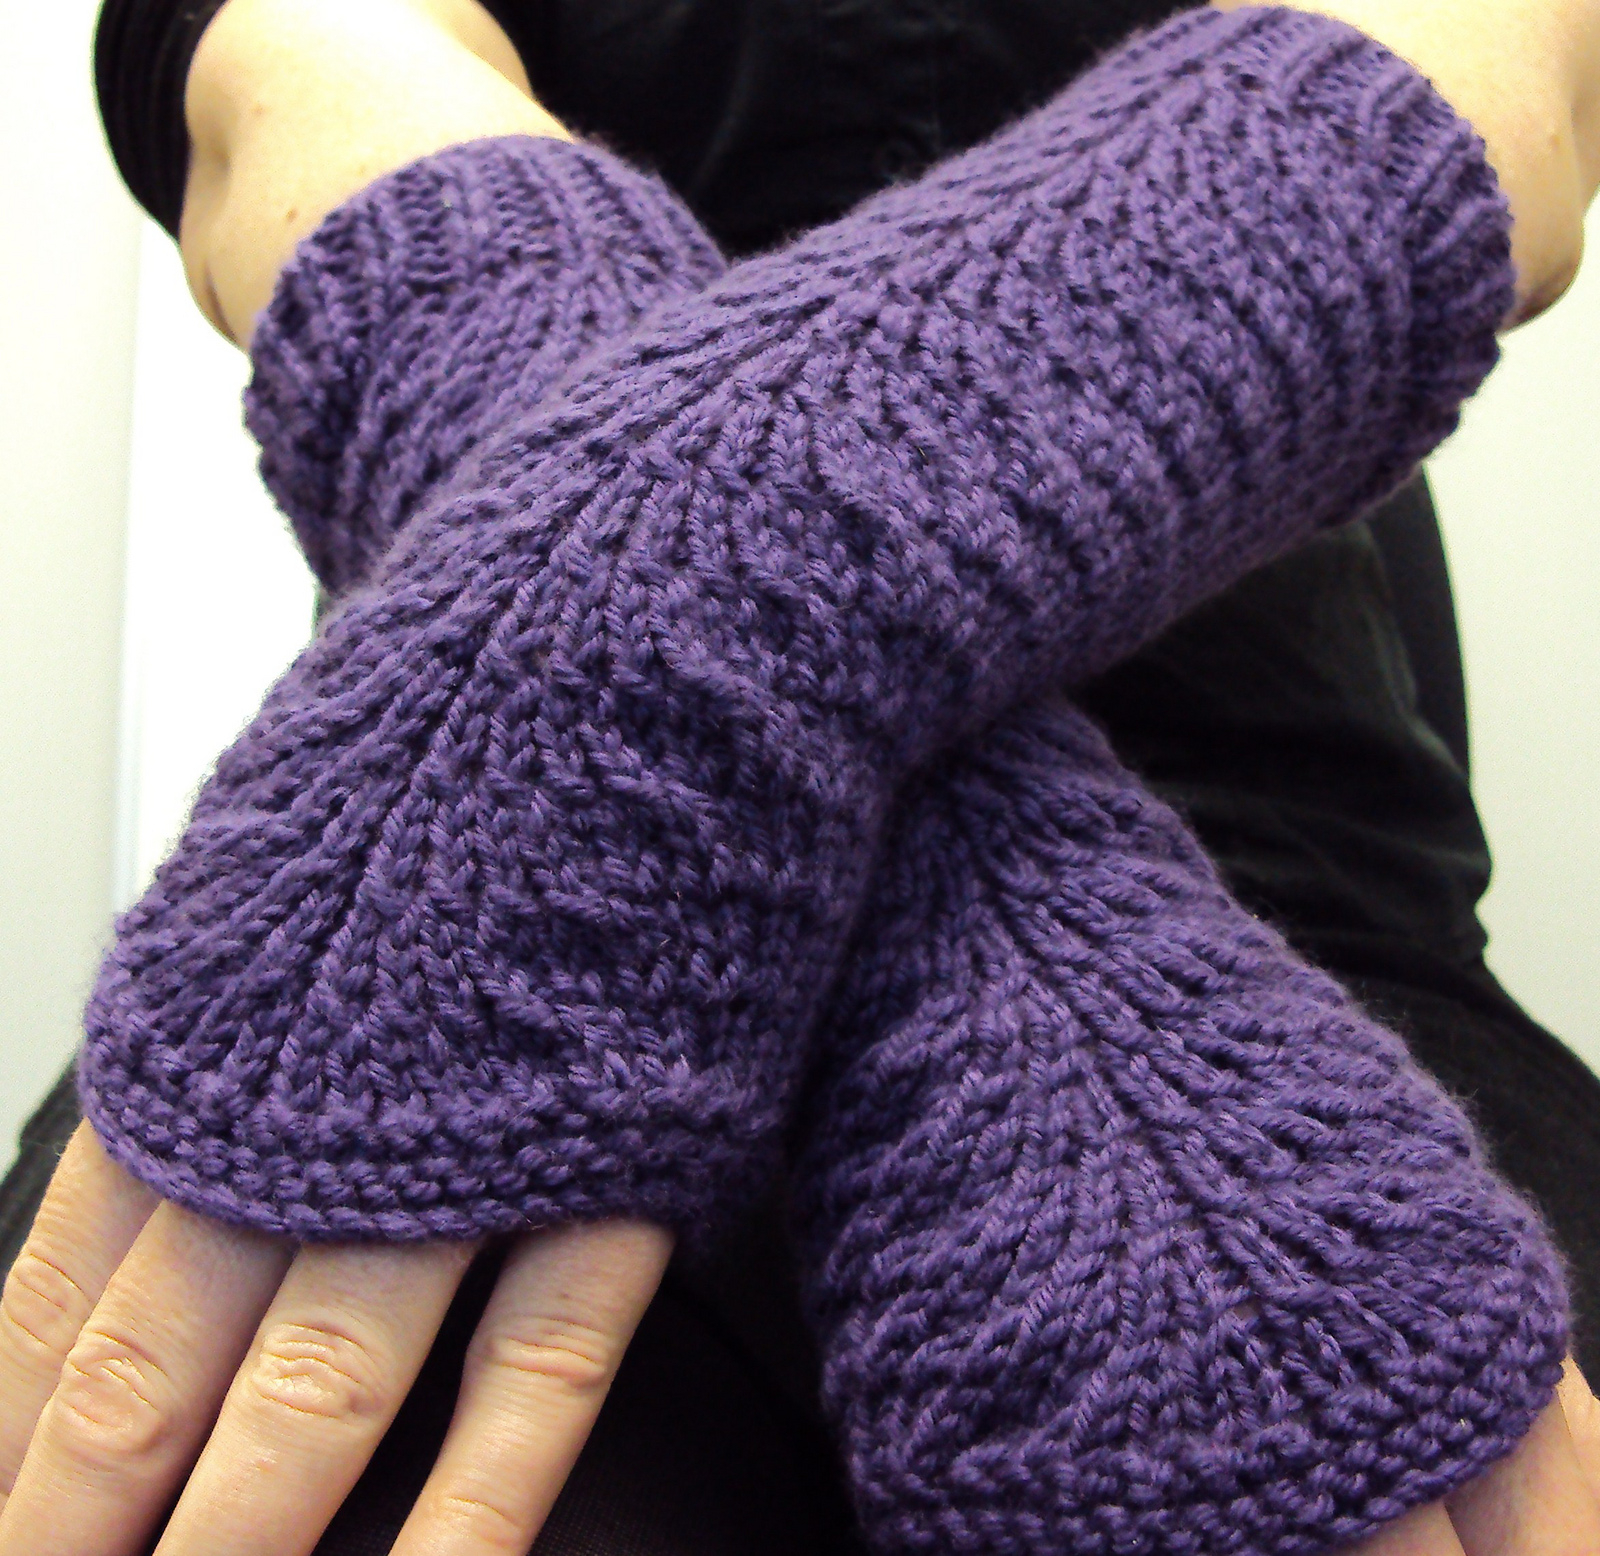 Knitting Pattern For Gloves Easy Mitts Knit Flat Knitting Patterns In The Loop Knitting